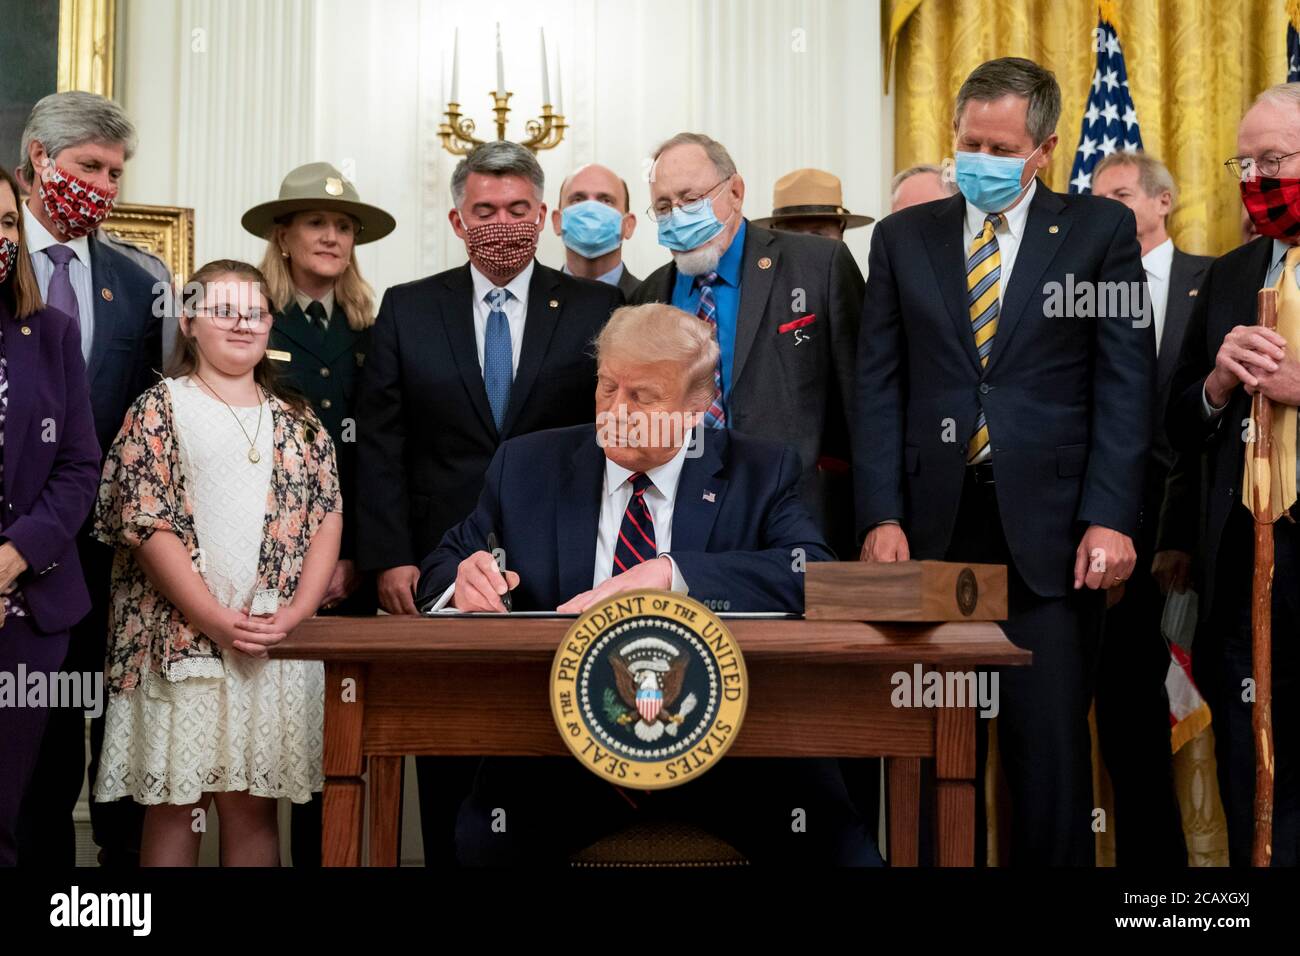 U.S. President Donald Trump signs into law the Great American Outdoors Act during an event in the East Room of the White House August 4, 2020 in Washington, D.C. Stock Photo